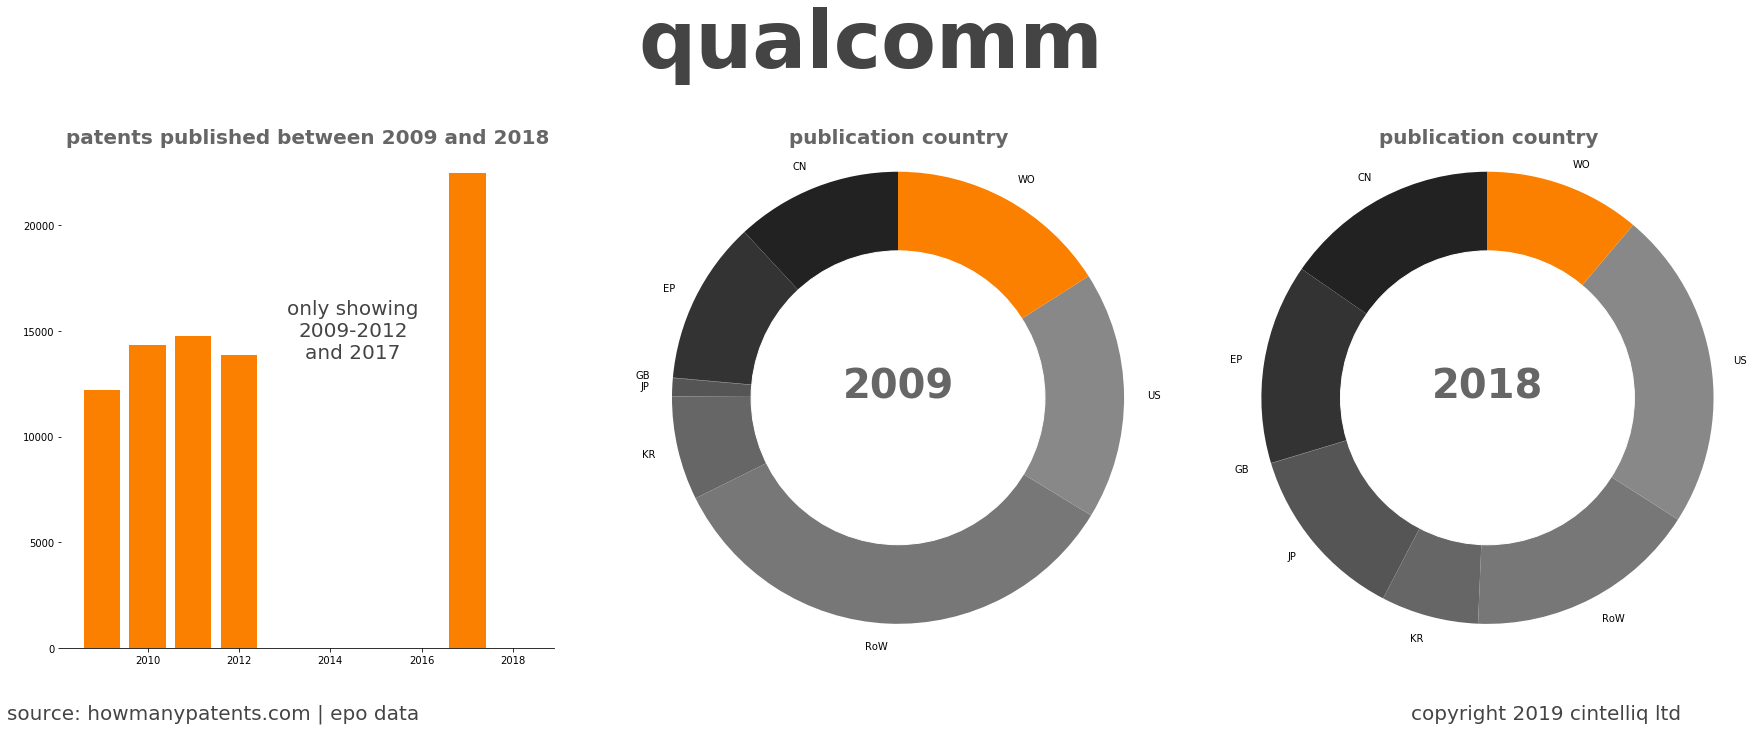 summary of patents for Qualcomm